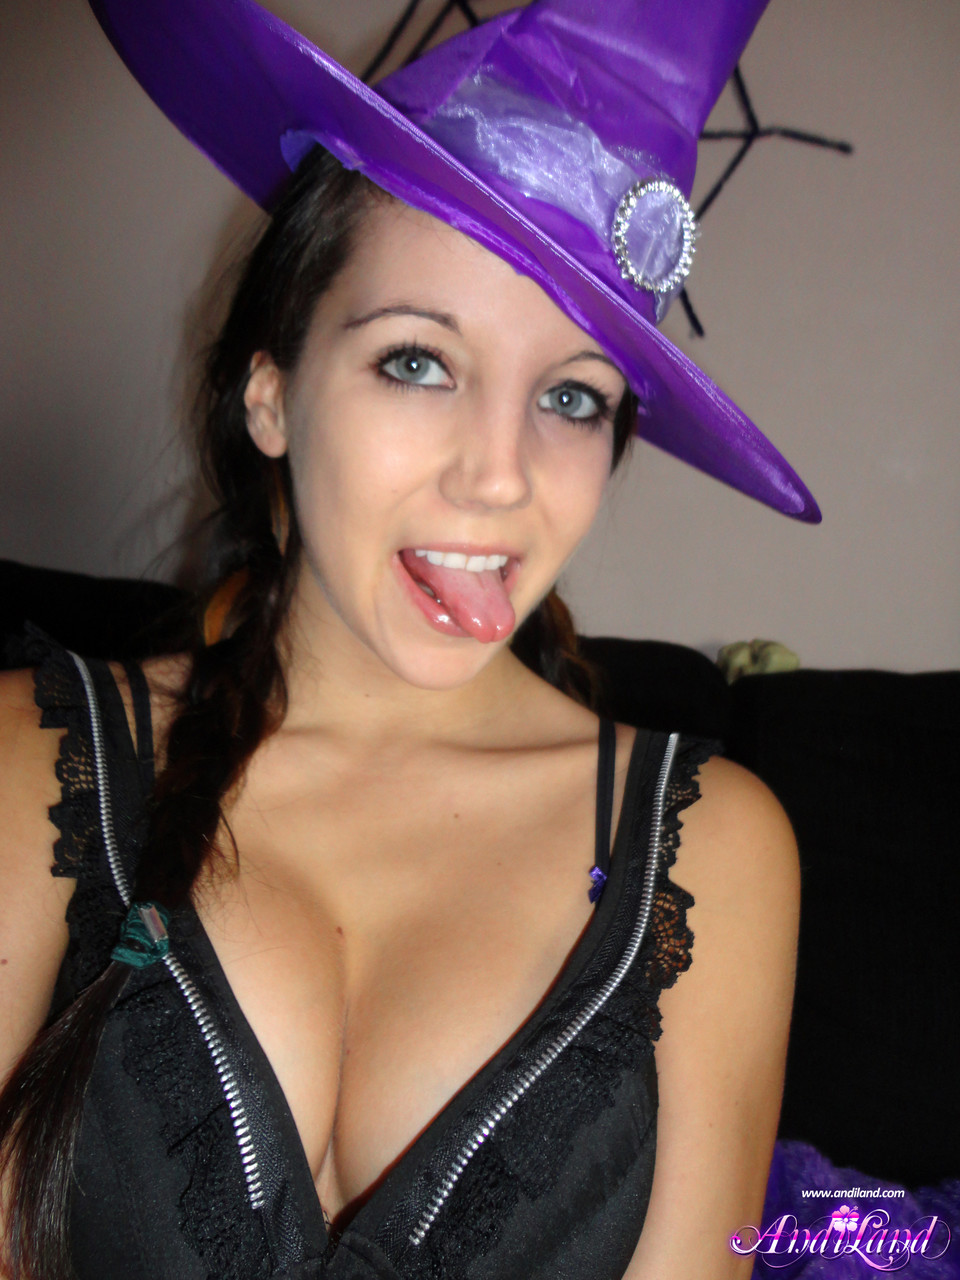 Teen amateur Andi Land teases during upskirt action in a Halloween outfit foto porno #428432669 | Andi Land Pics, Andi Land, Cosplay, porno ponsel